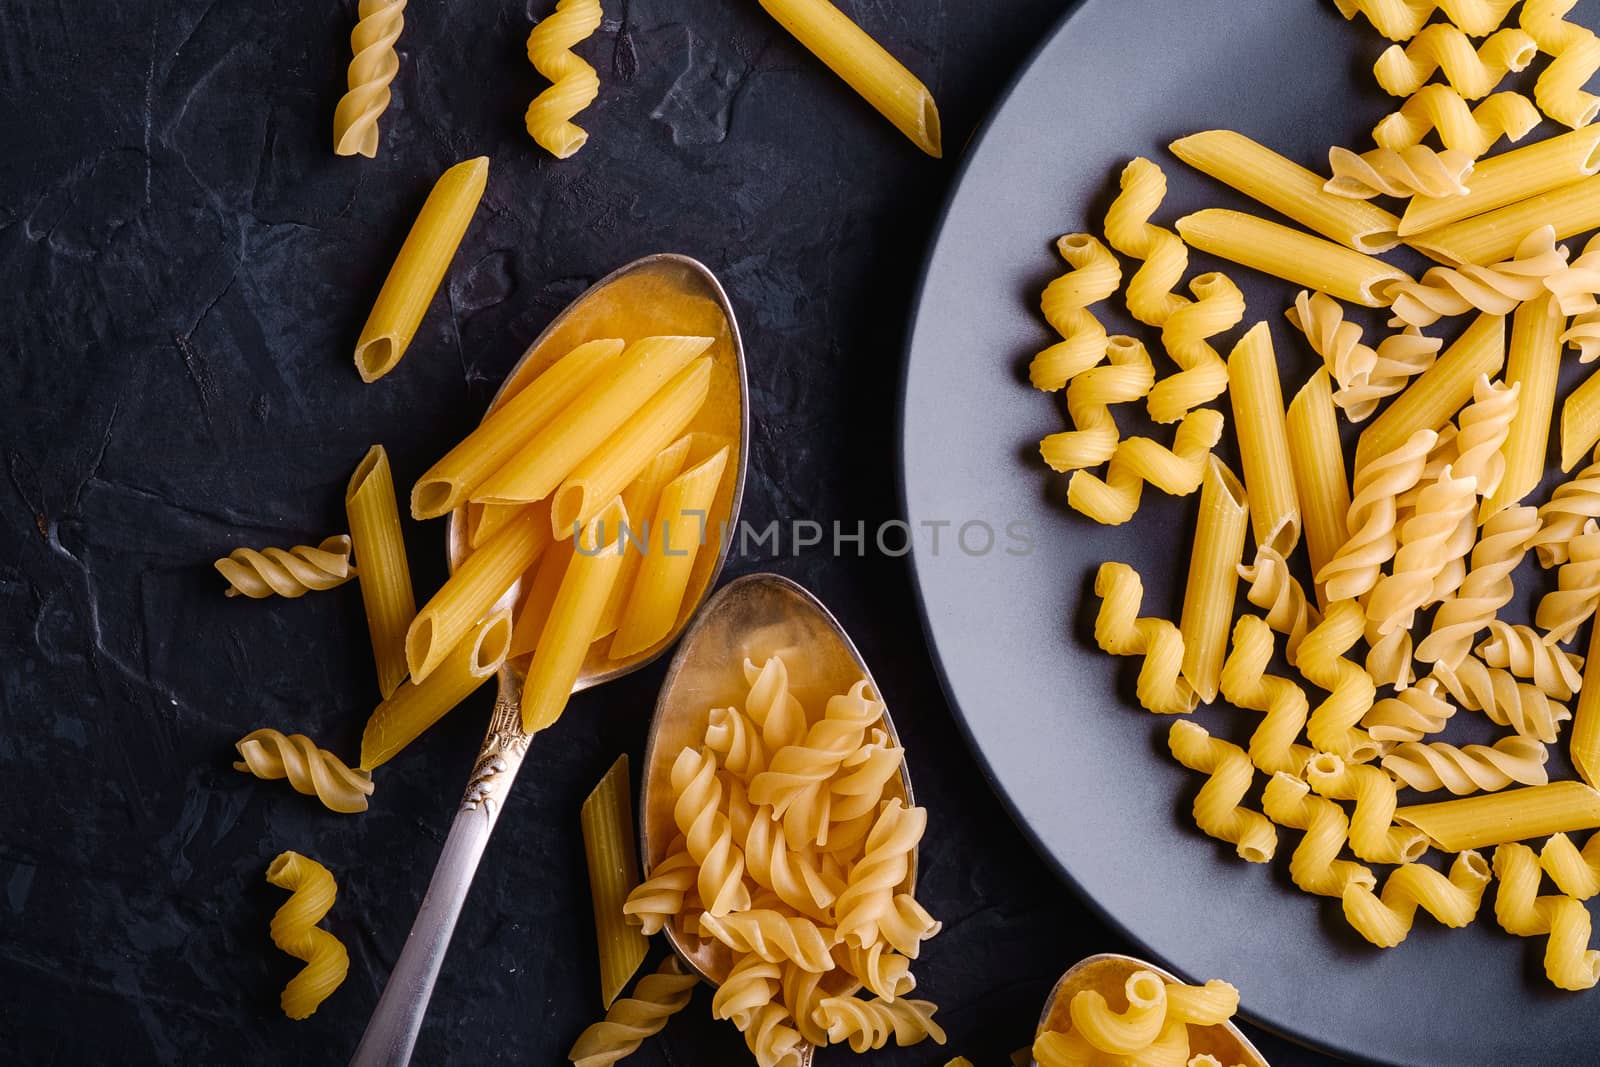 Three cutlery spoons and plate with variety of uncooked golden wheat pasta on dark black textured background, top view macro